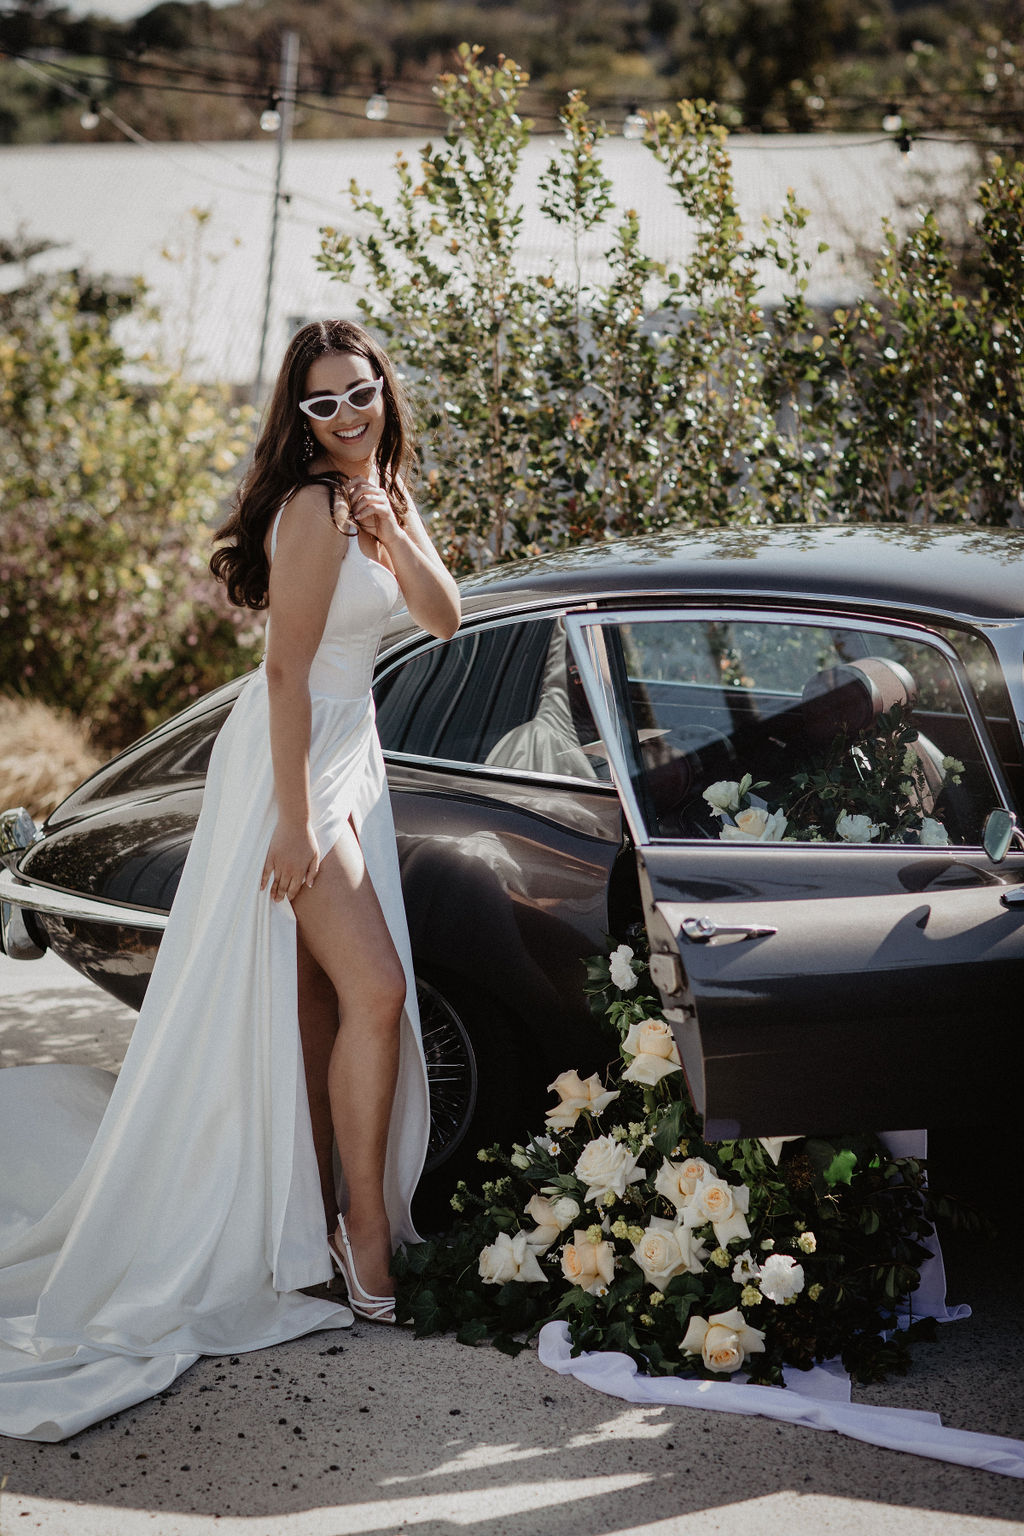 mt weddings perth photography florals bridal gown styled shoot